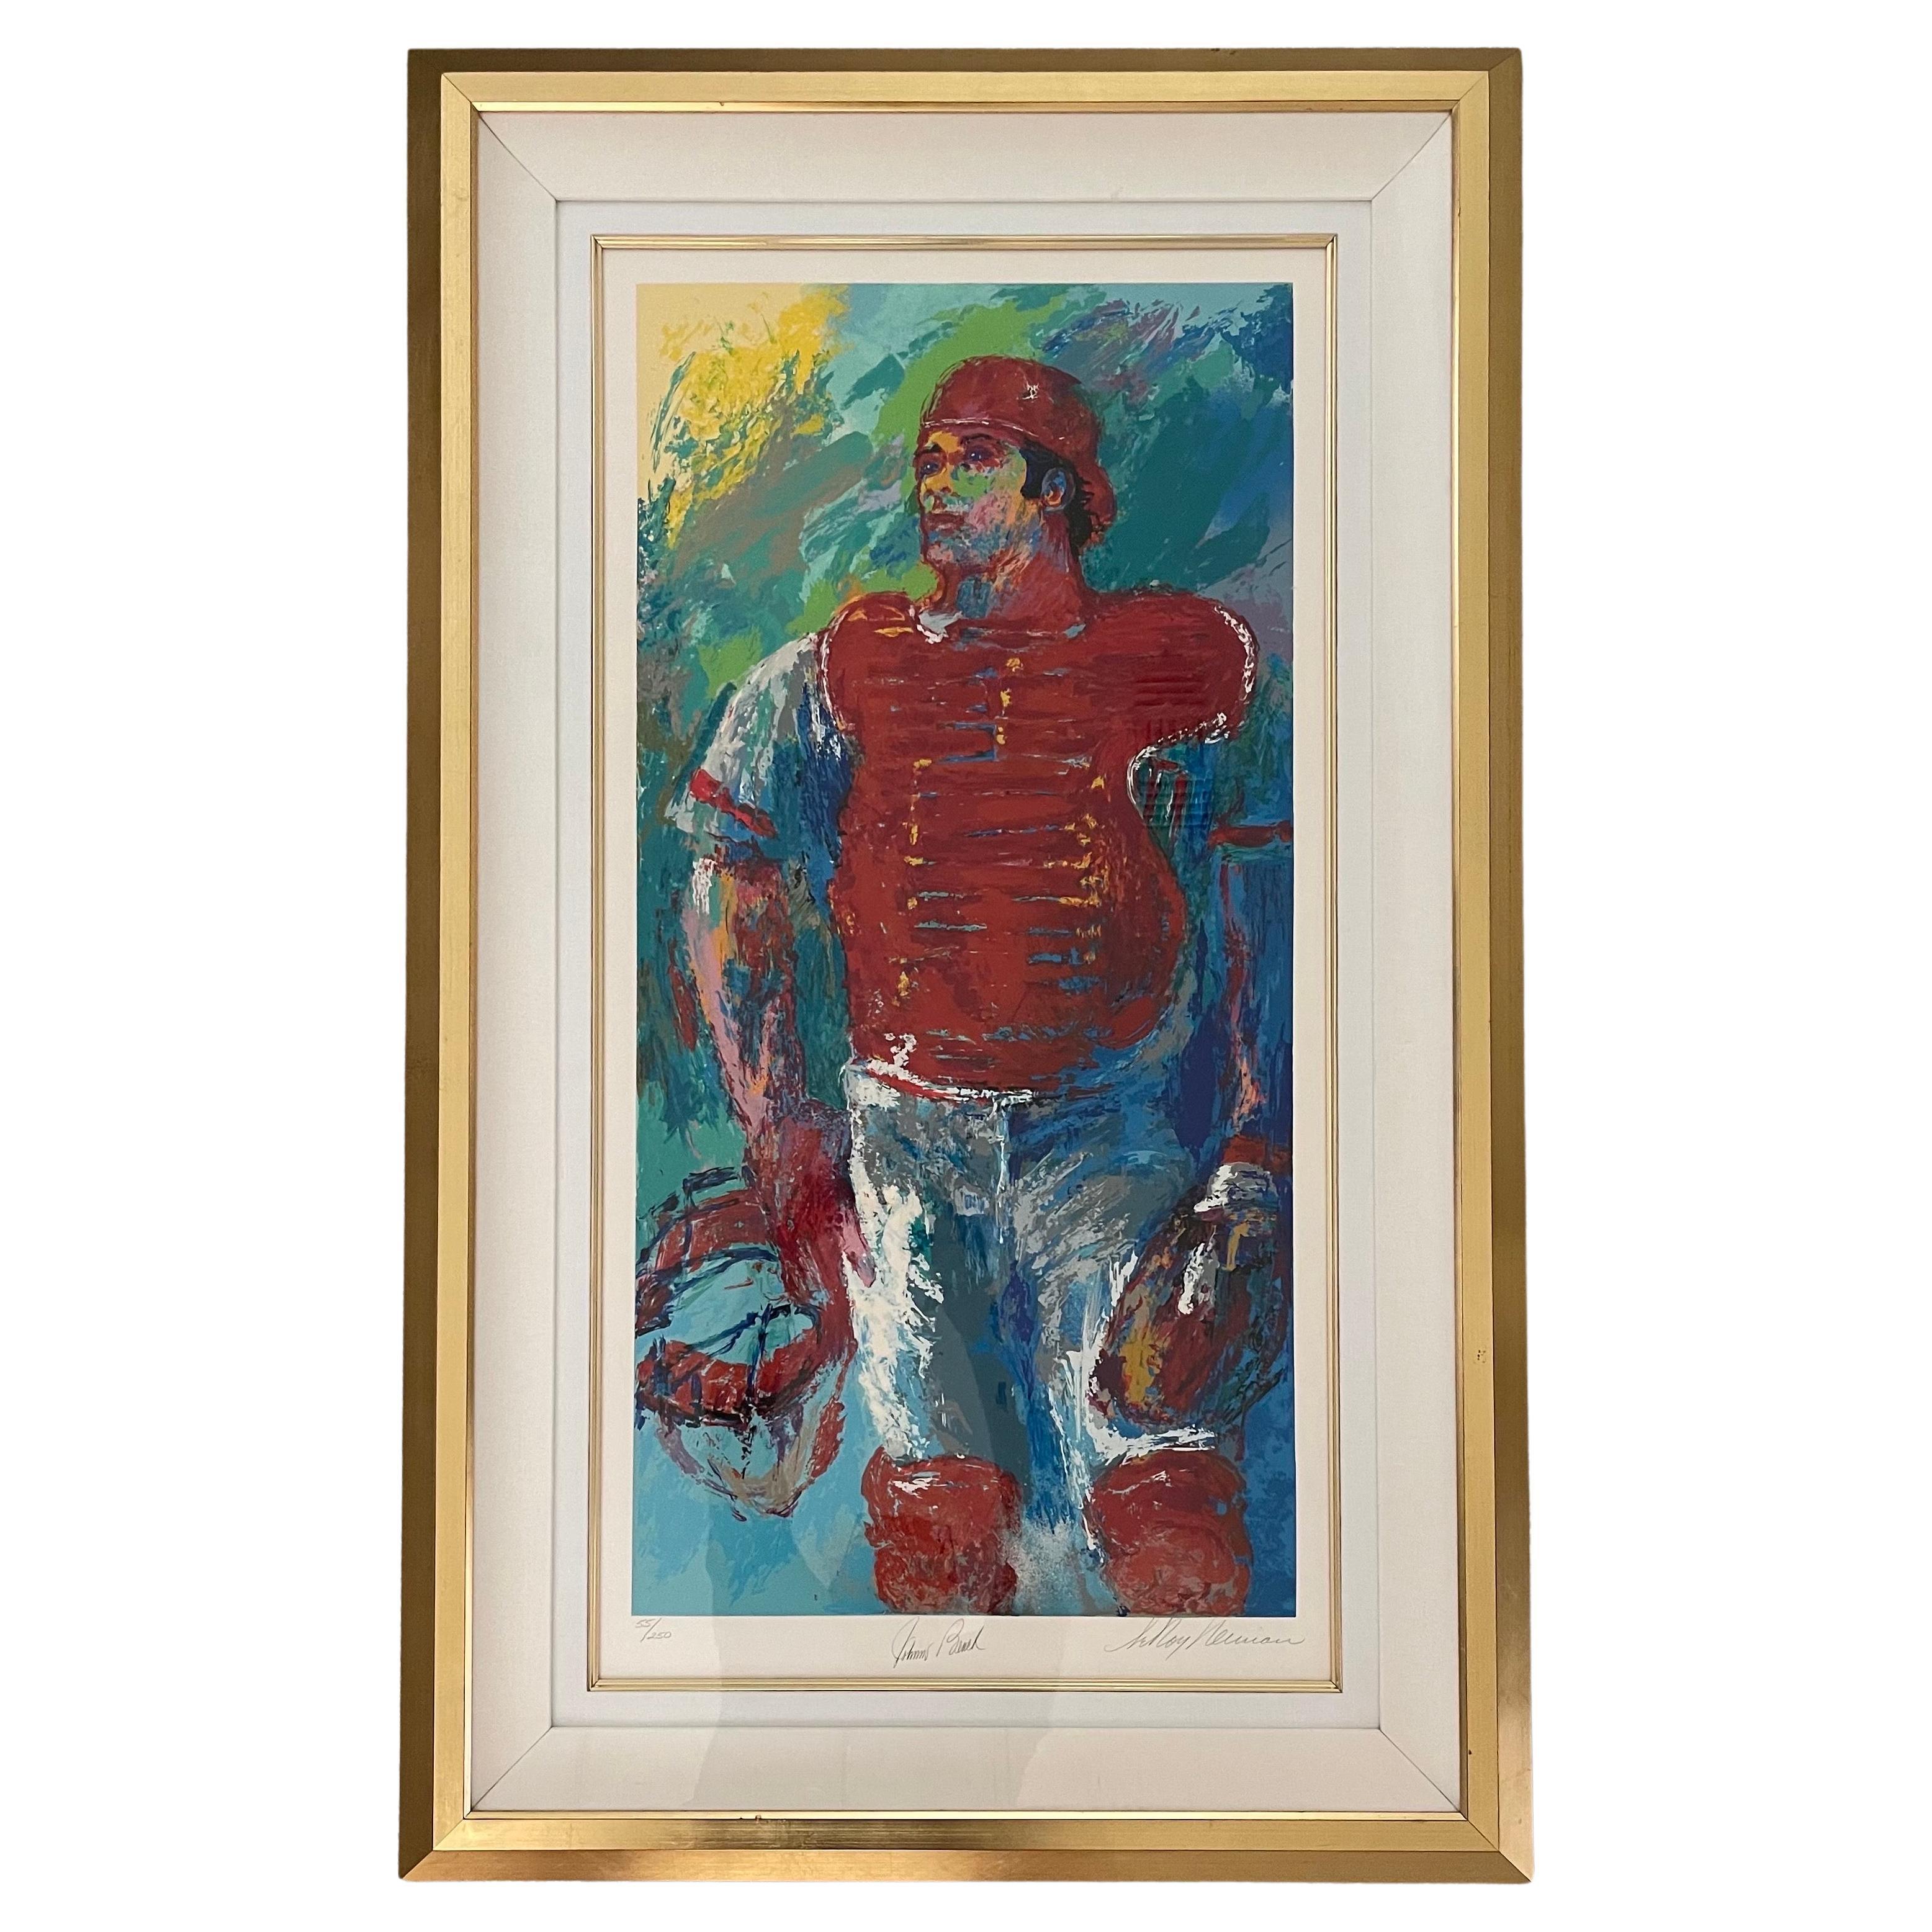 Double Signed Ltd Edition Serigraph "Johnny Bench - The Catcher" by Leroy Neiman For Sale